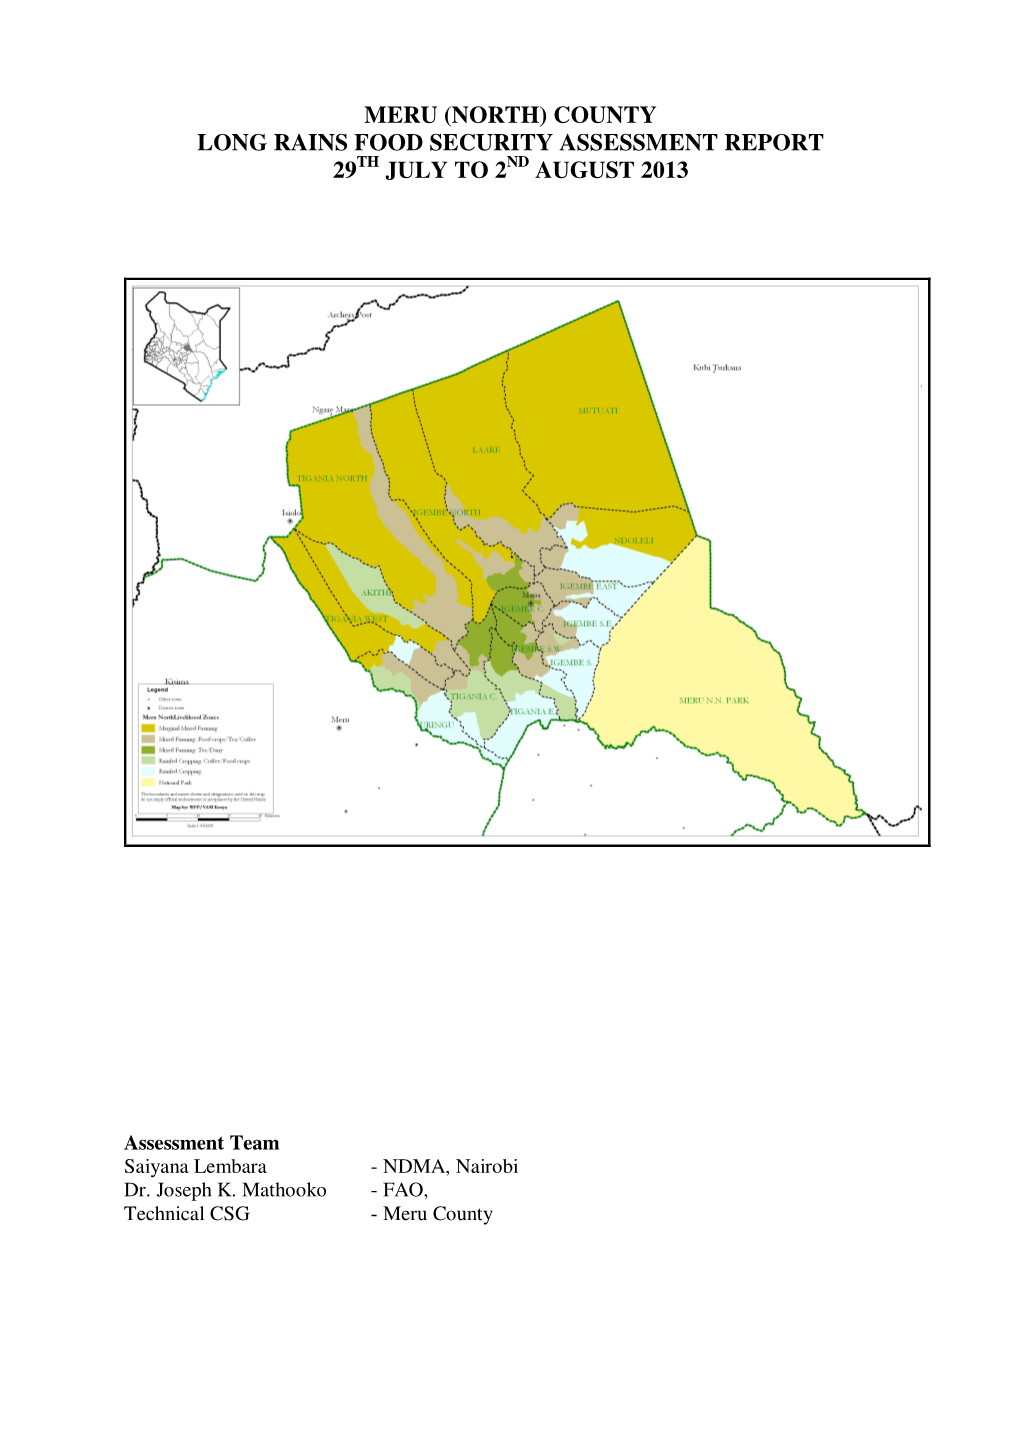 Meru (North) County Long Rains Food Security Assessment Report 29 Th July to 2 Nd August 2013